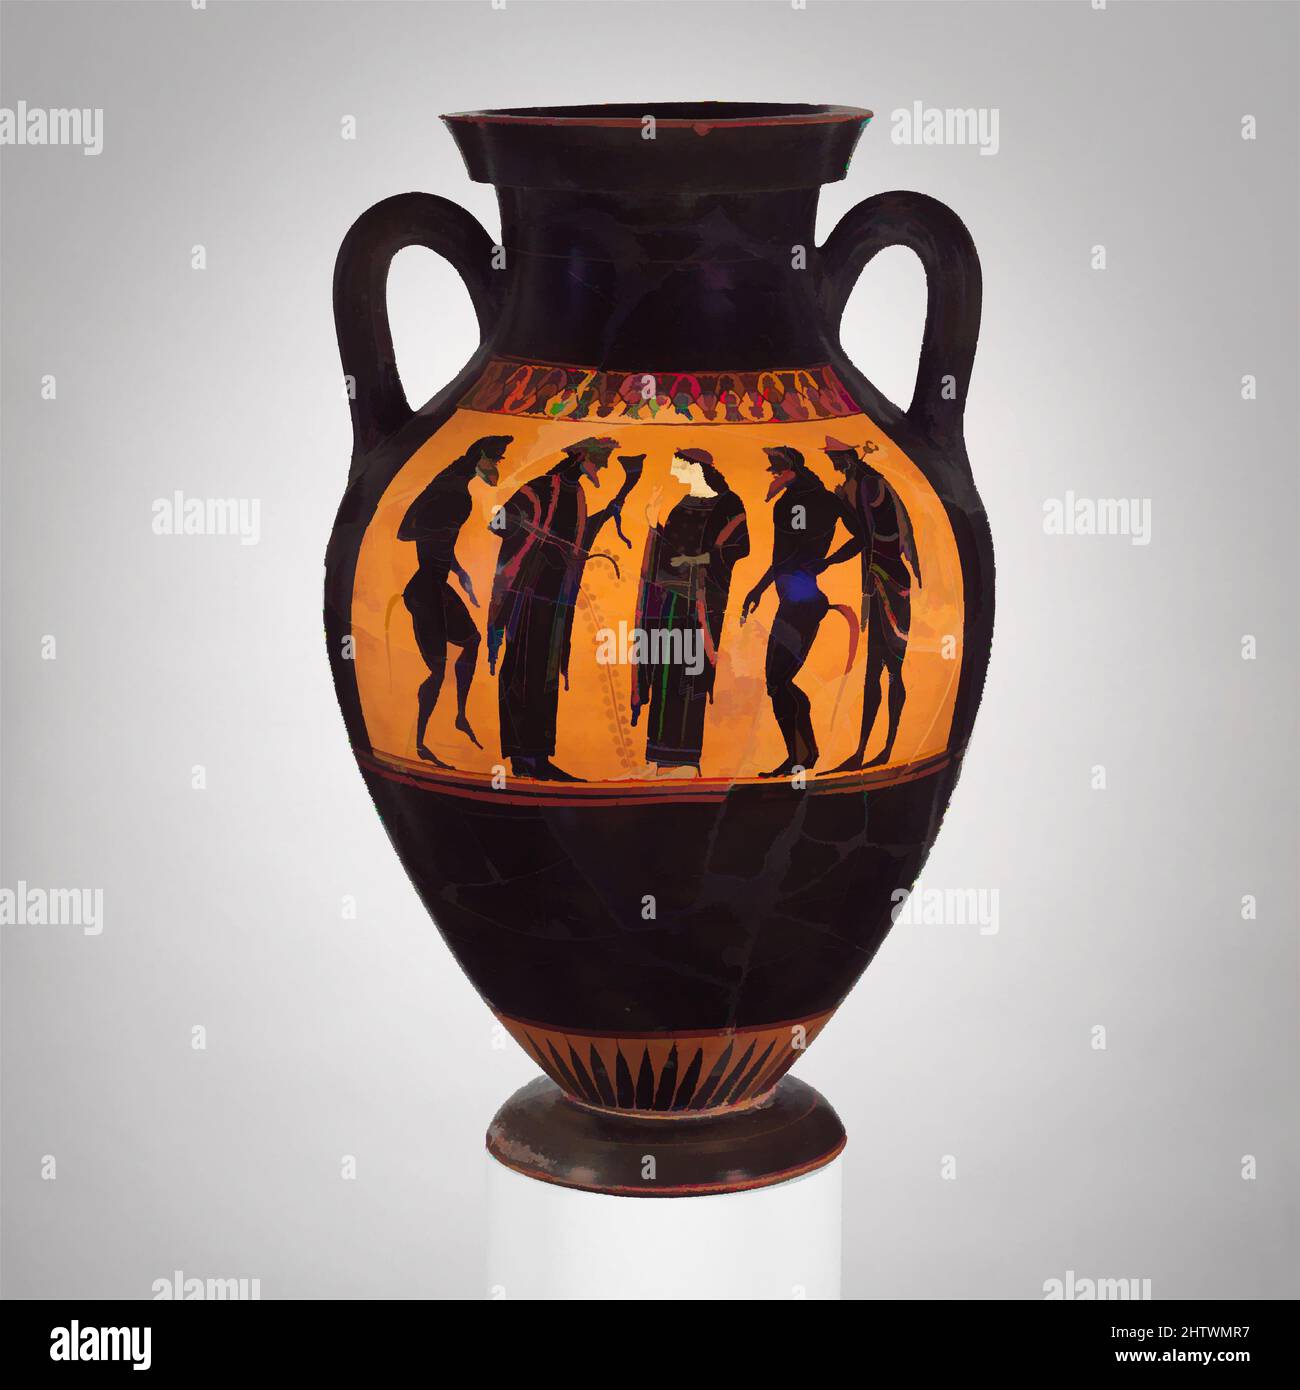 Art inspired by Terracotta amphora (jar), Archaic, ca. 530–520 B.C., Greek, Attic, Terracotta; black-figure, H. 21 13/16 in. (55.4 cm), Vases, Obverse, Athena and Herakles in a chariot, Reverse, Dionysos and Ariadne with satyrs and Hermes. There appears to be a chiastic relationship, Classic works modernized by Artotop with a splash of modernity. Shapes, color and value, eye-catching visual impact on art. Emotions through freedom of artworks in a contemporary way. A timeless message pursuing a wildly creative new direction. Artists turning to the digital medium and creating the Artotop NFT Stock Photo